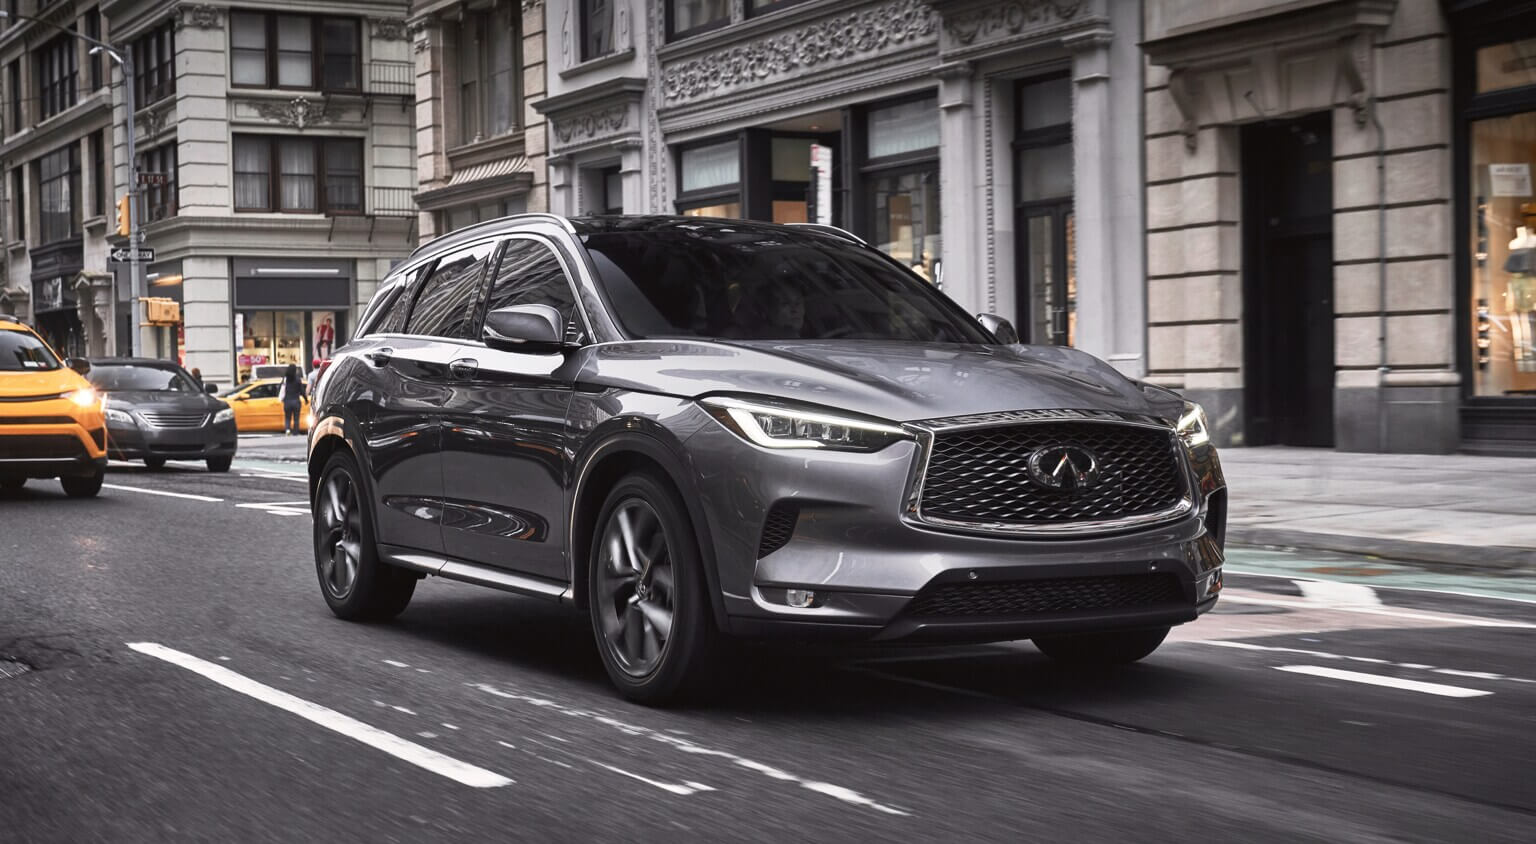 2021 Infiniti Qx50 with muscular lines